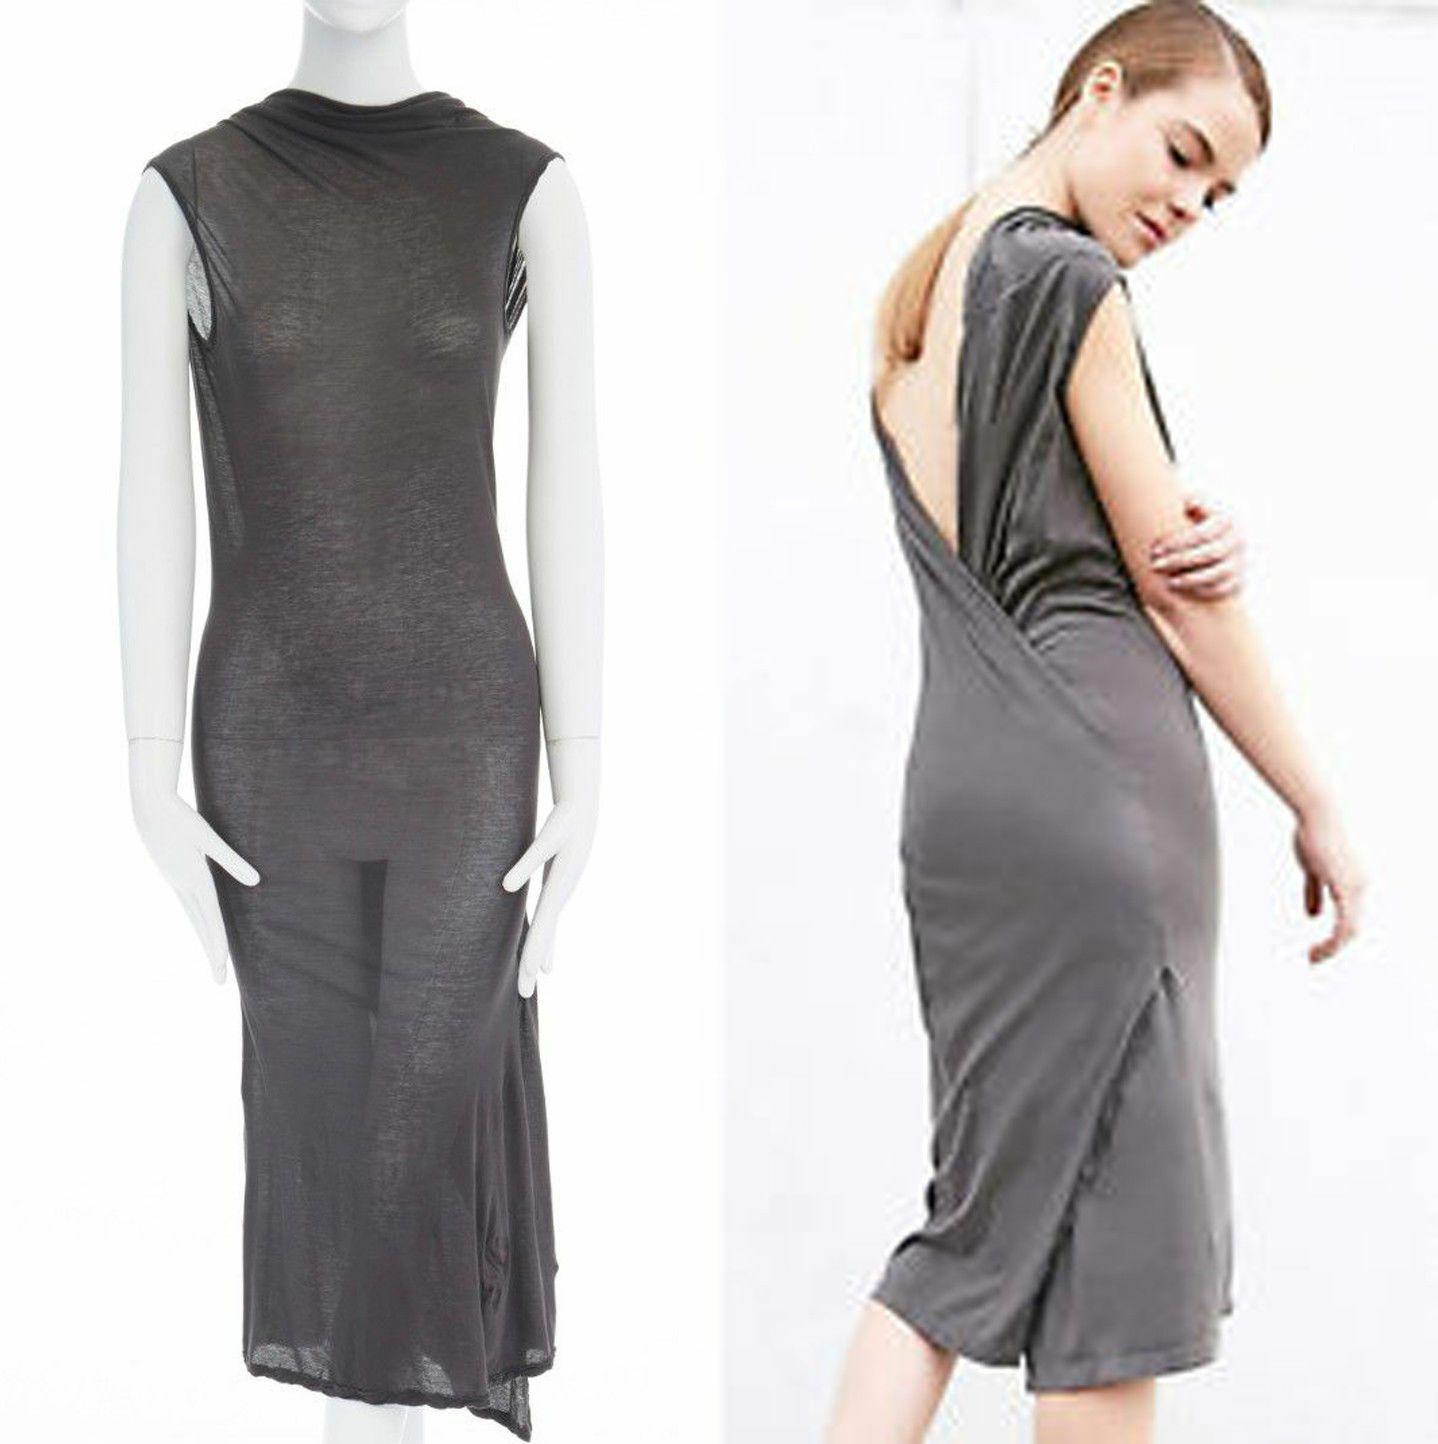 new DRKSHDW RICK OWENS grey fine cotton draped open back slit midi dress XS

RICK OWENS DRKSHDW Graphite dark grey. Fine cotton. HIgh neck. Cap sleeve. Open draped back. Center back vent. Casual dress. Made in Italy.

CONDITION
Pristine with